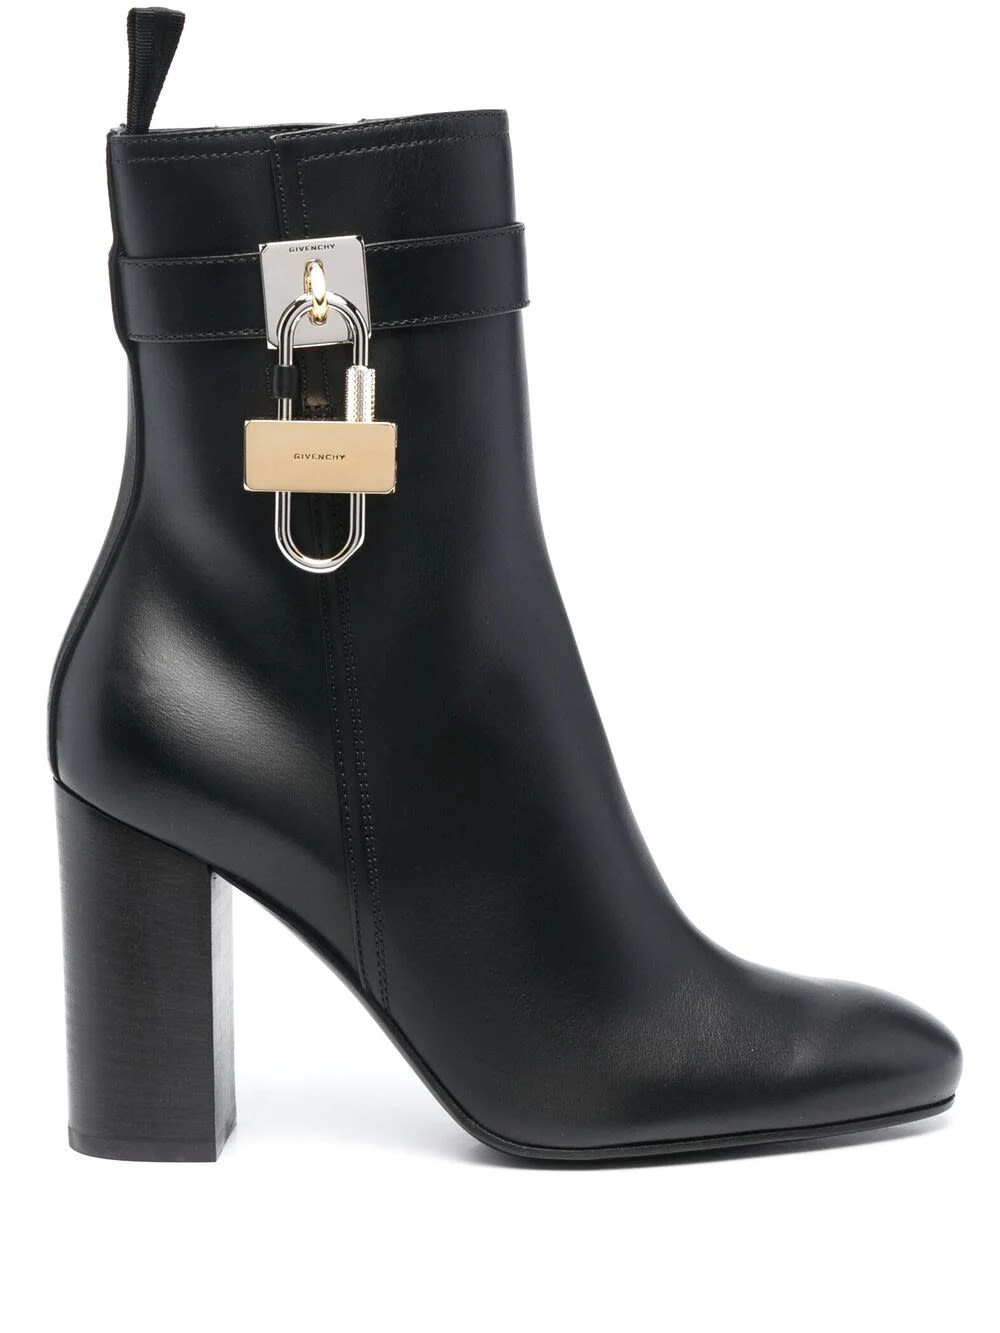 Buy Givenchy Black Leather Ankle Boot With Padlock online, shop Givenchy shoes with free shipping